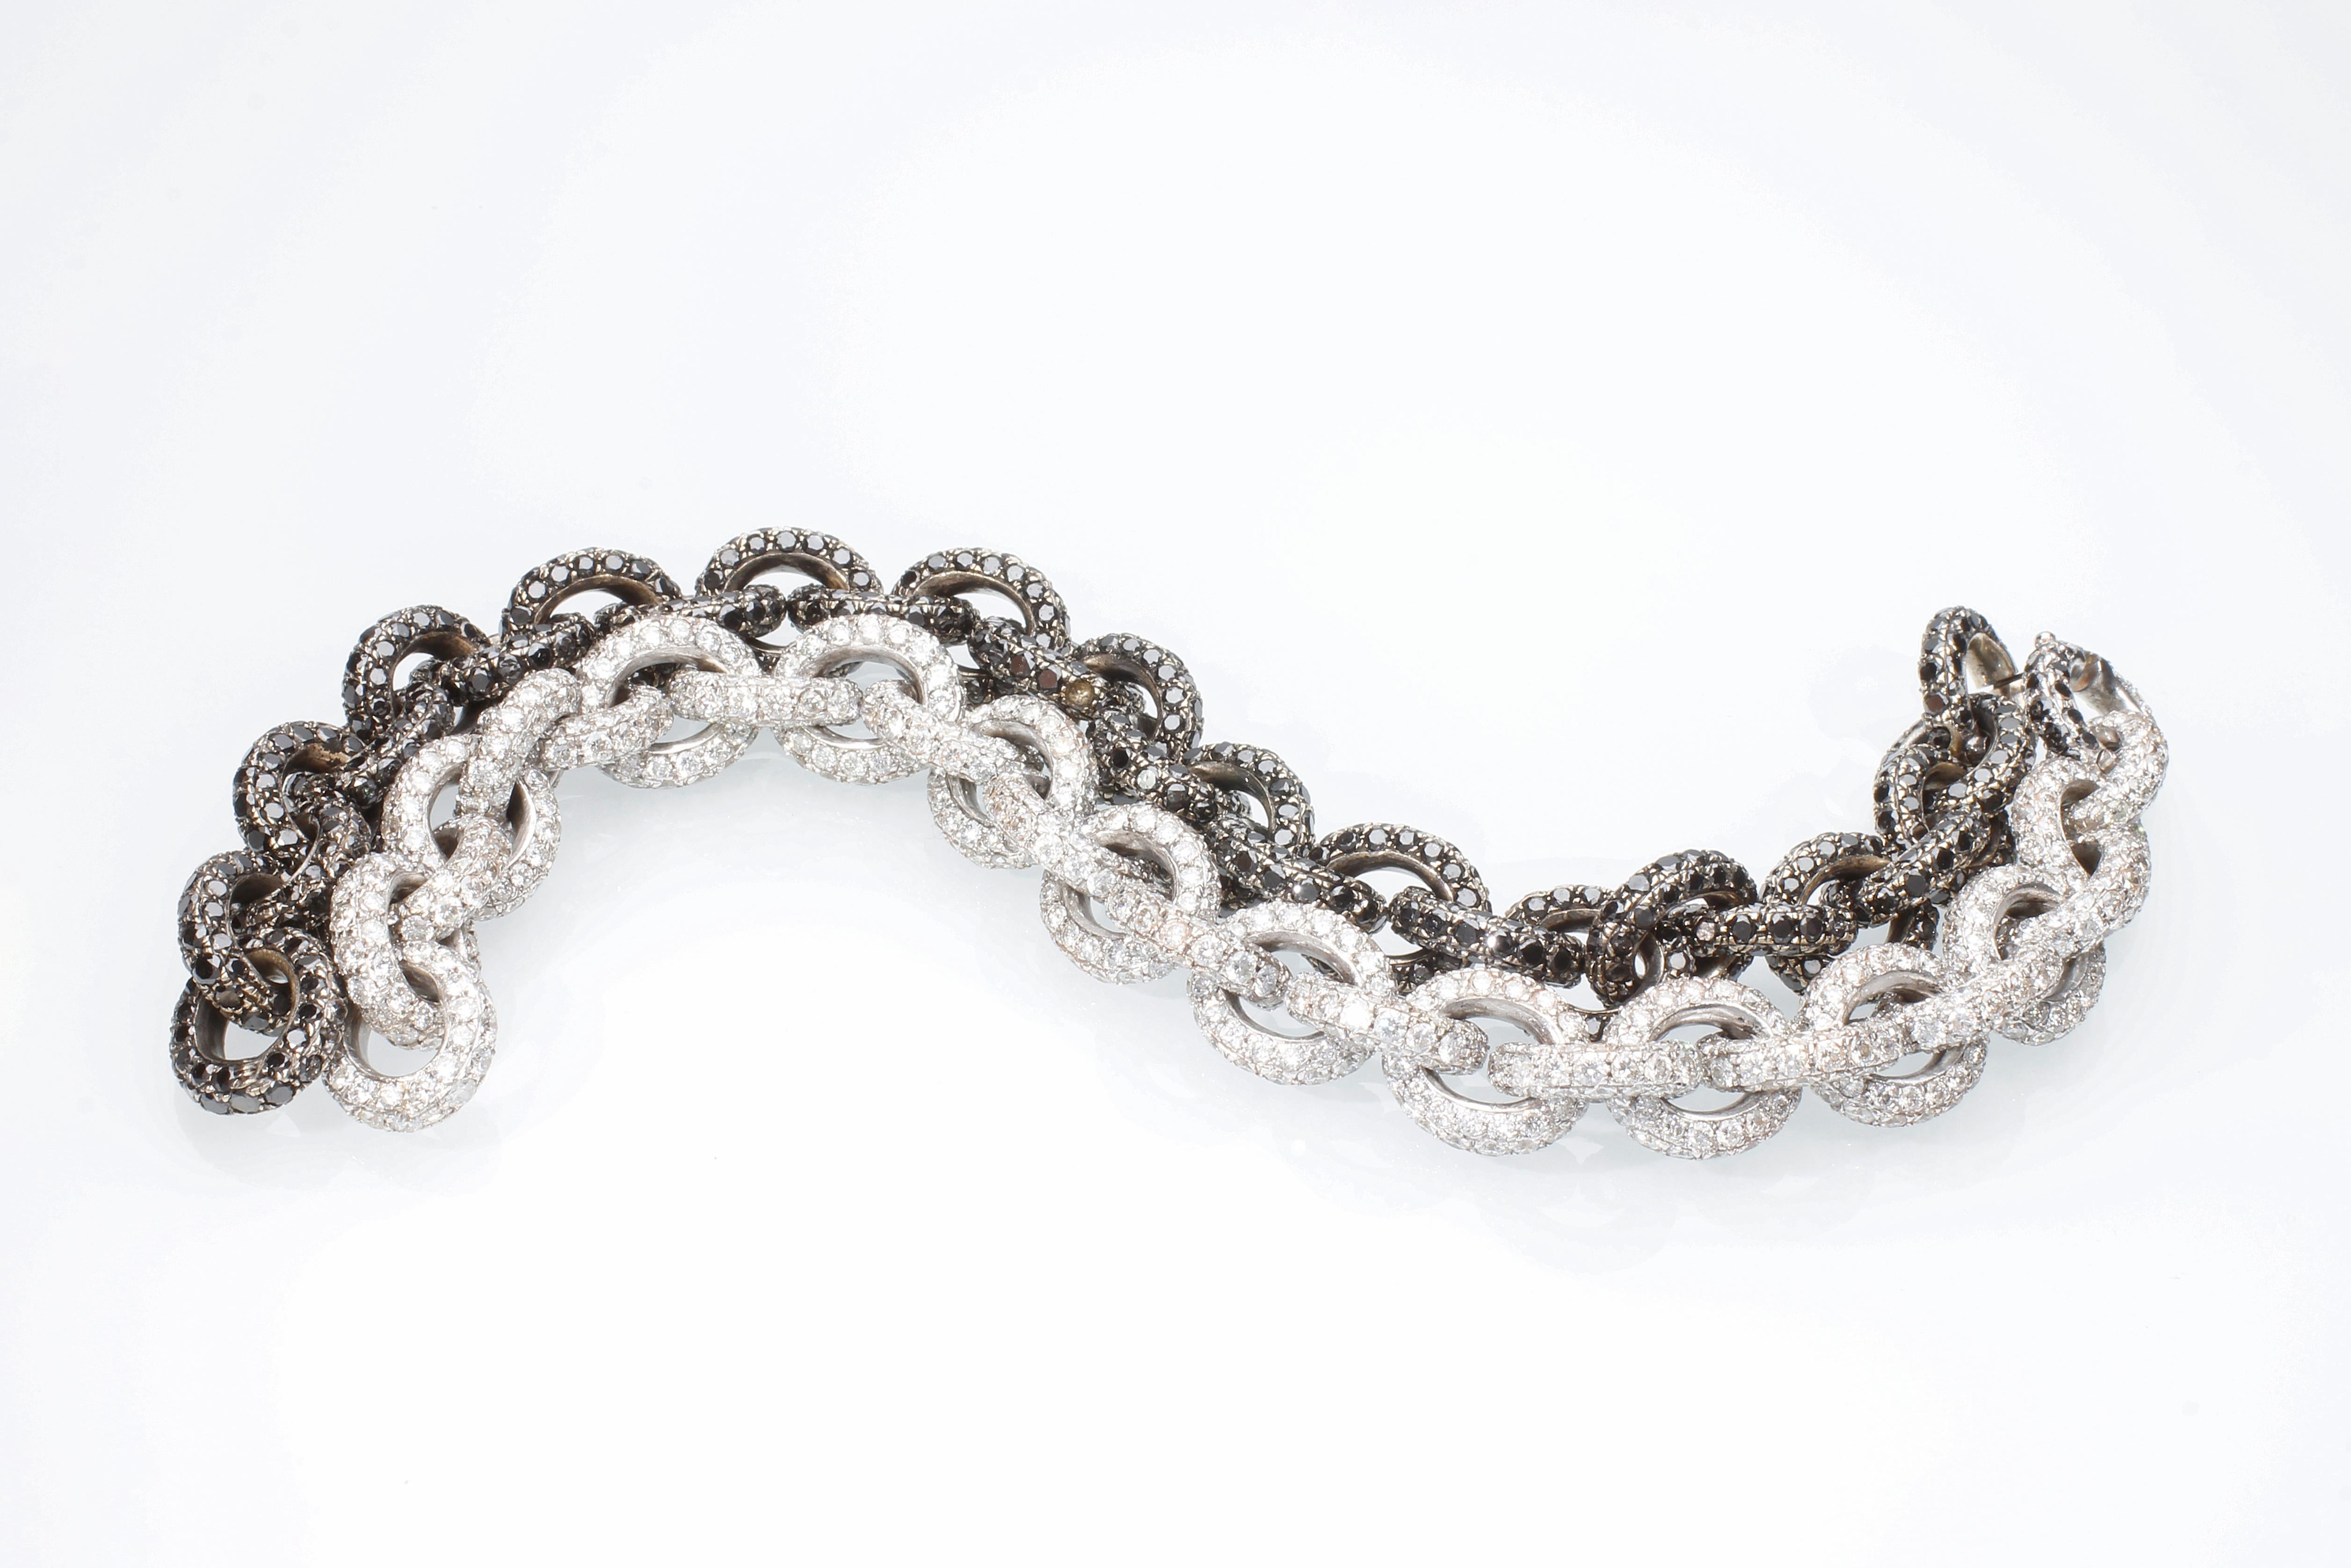 Chain Bracelet with 30.76 Ct of White Diamonds. Handmade. Made in Italy For Sale 5